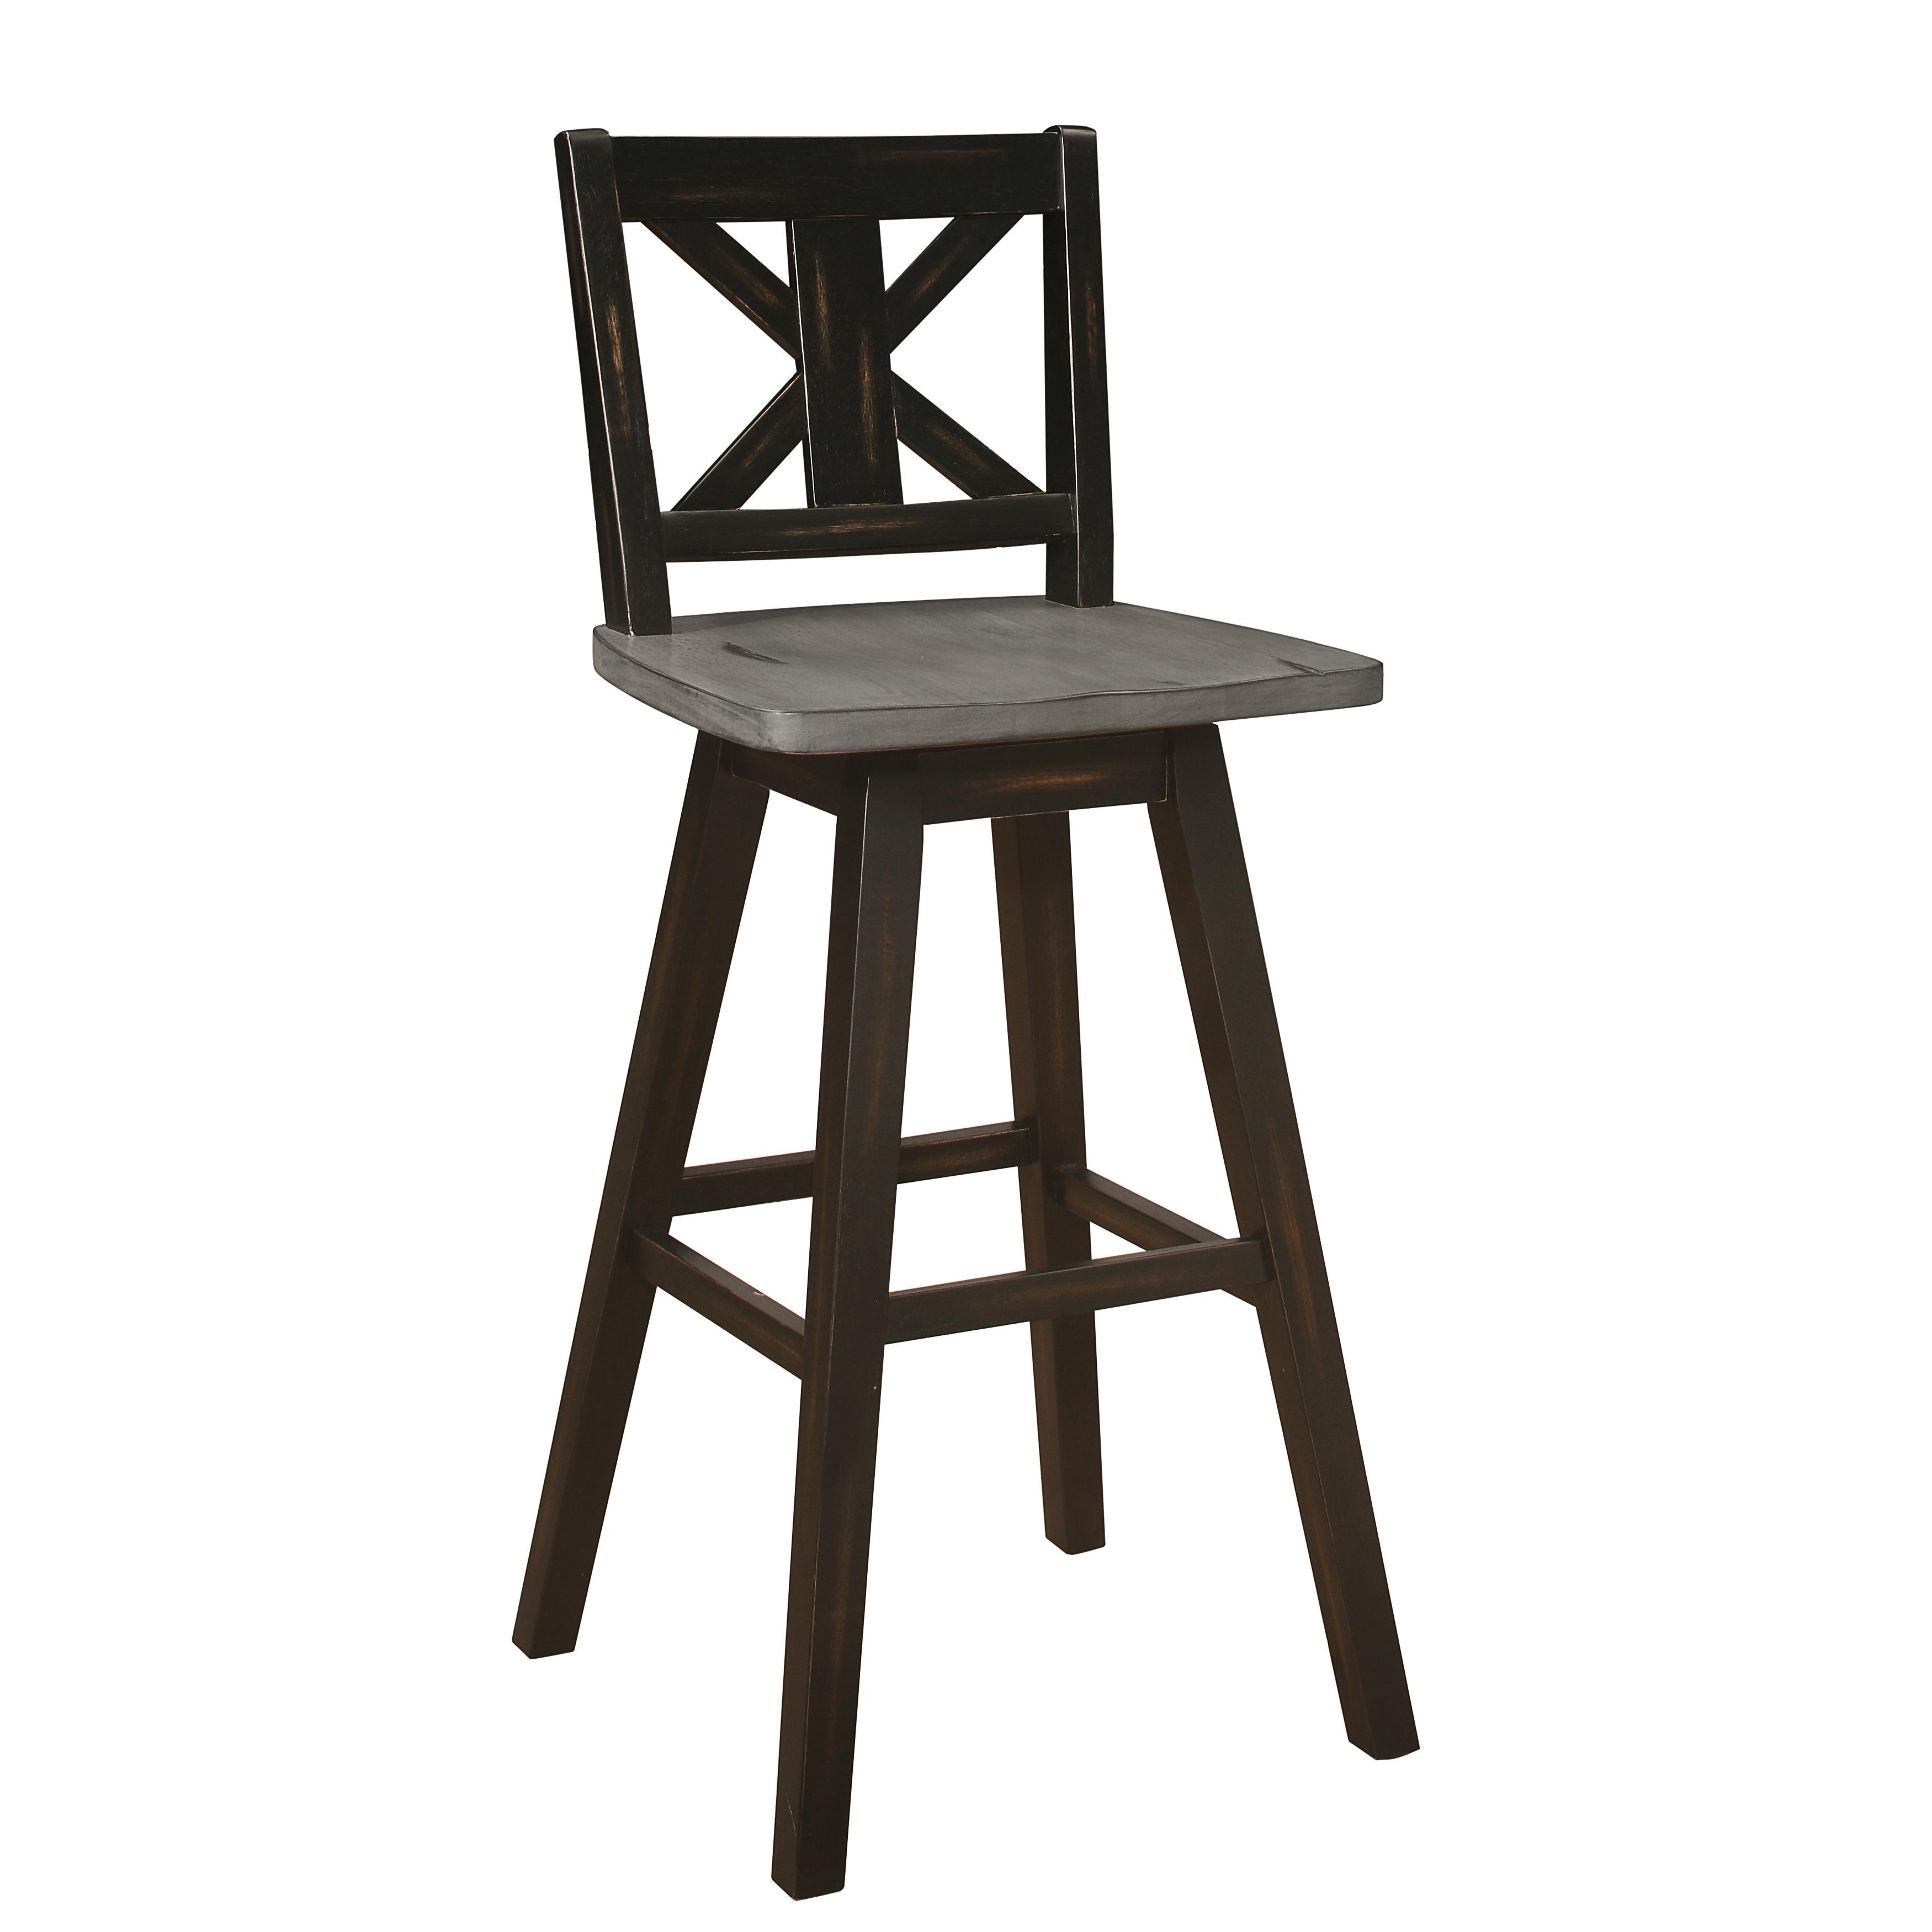 

    
Rustic Distressed Gray & Black Solid Wood 29" Counter Height Chair Set 2pcs Homelegance 5602-29BK Amsonia
